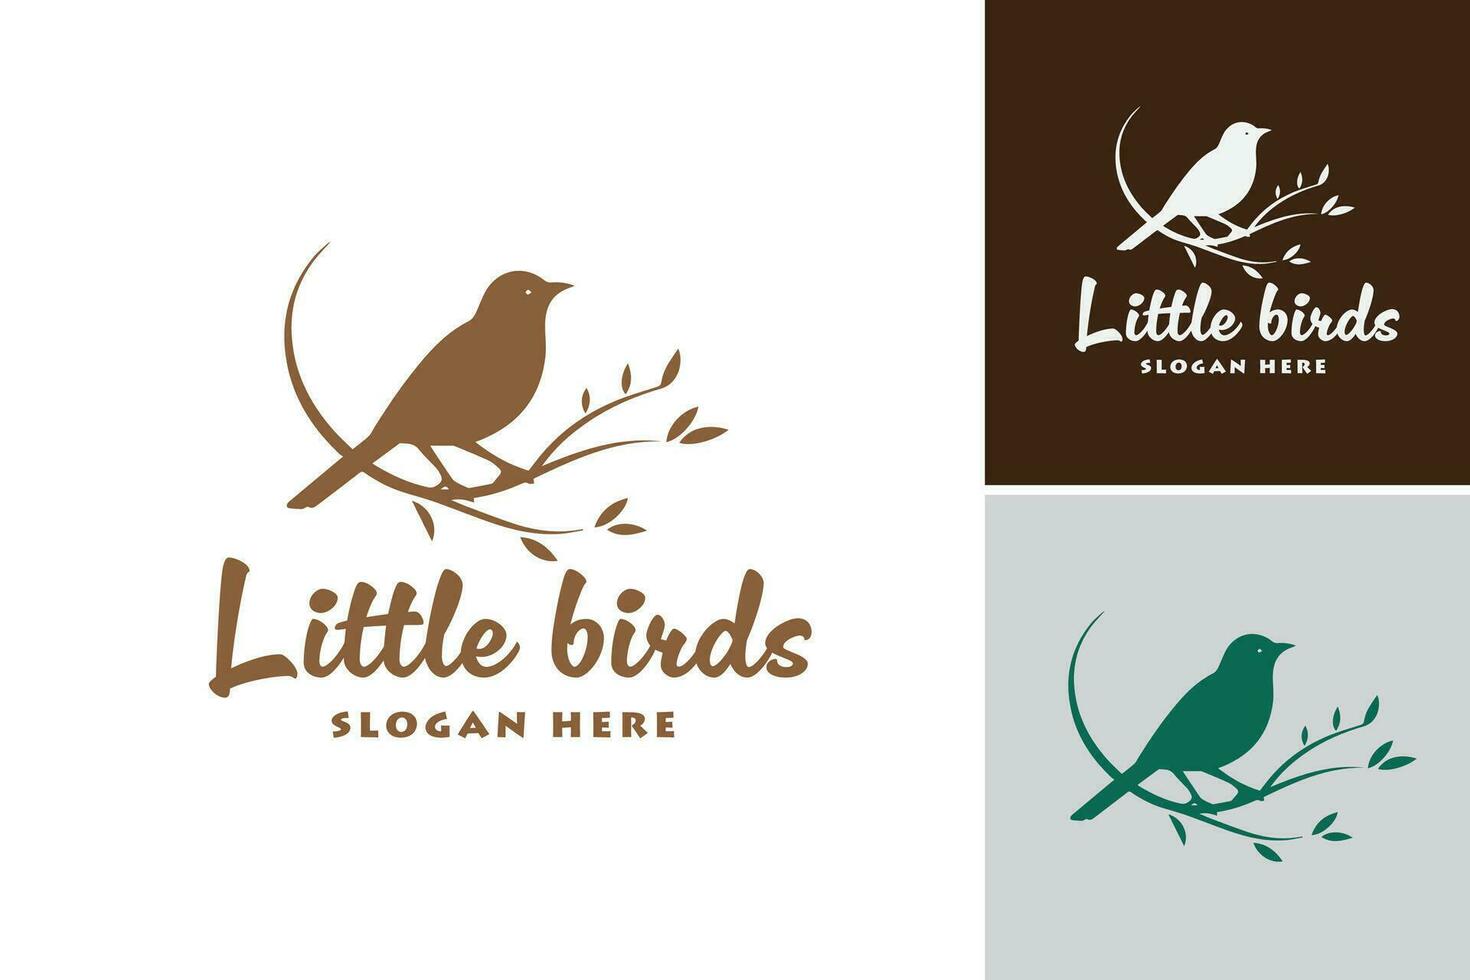 little birds logo suggests that this logo design asset is a logo featuring small bird elements. It is suitable for industries related to nature, birds, or eco-friendly brands. vector